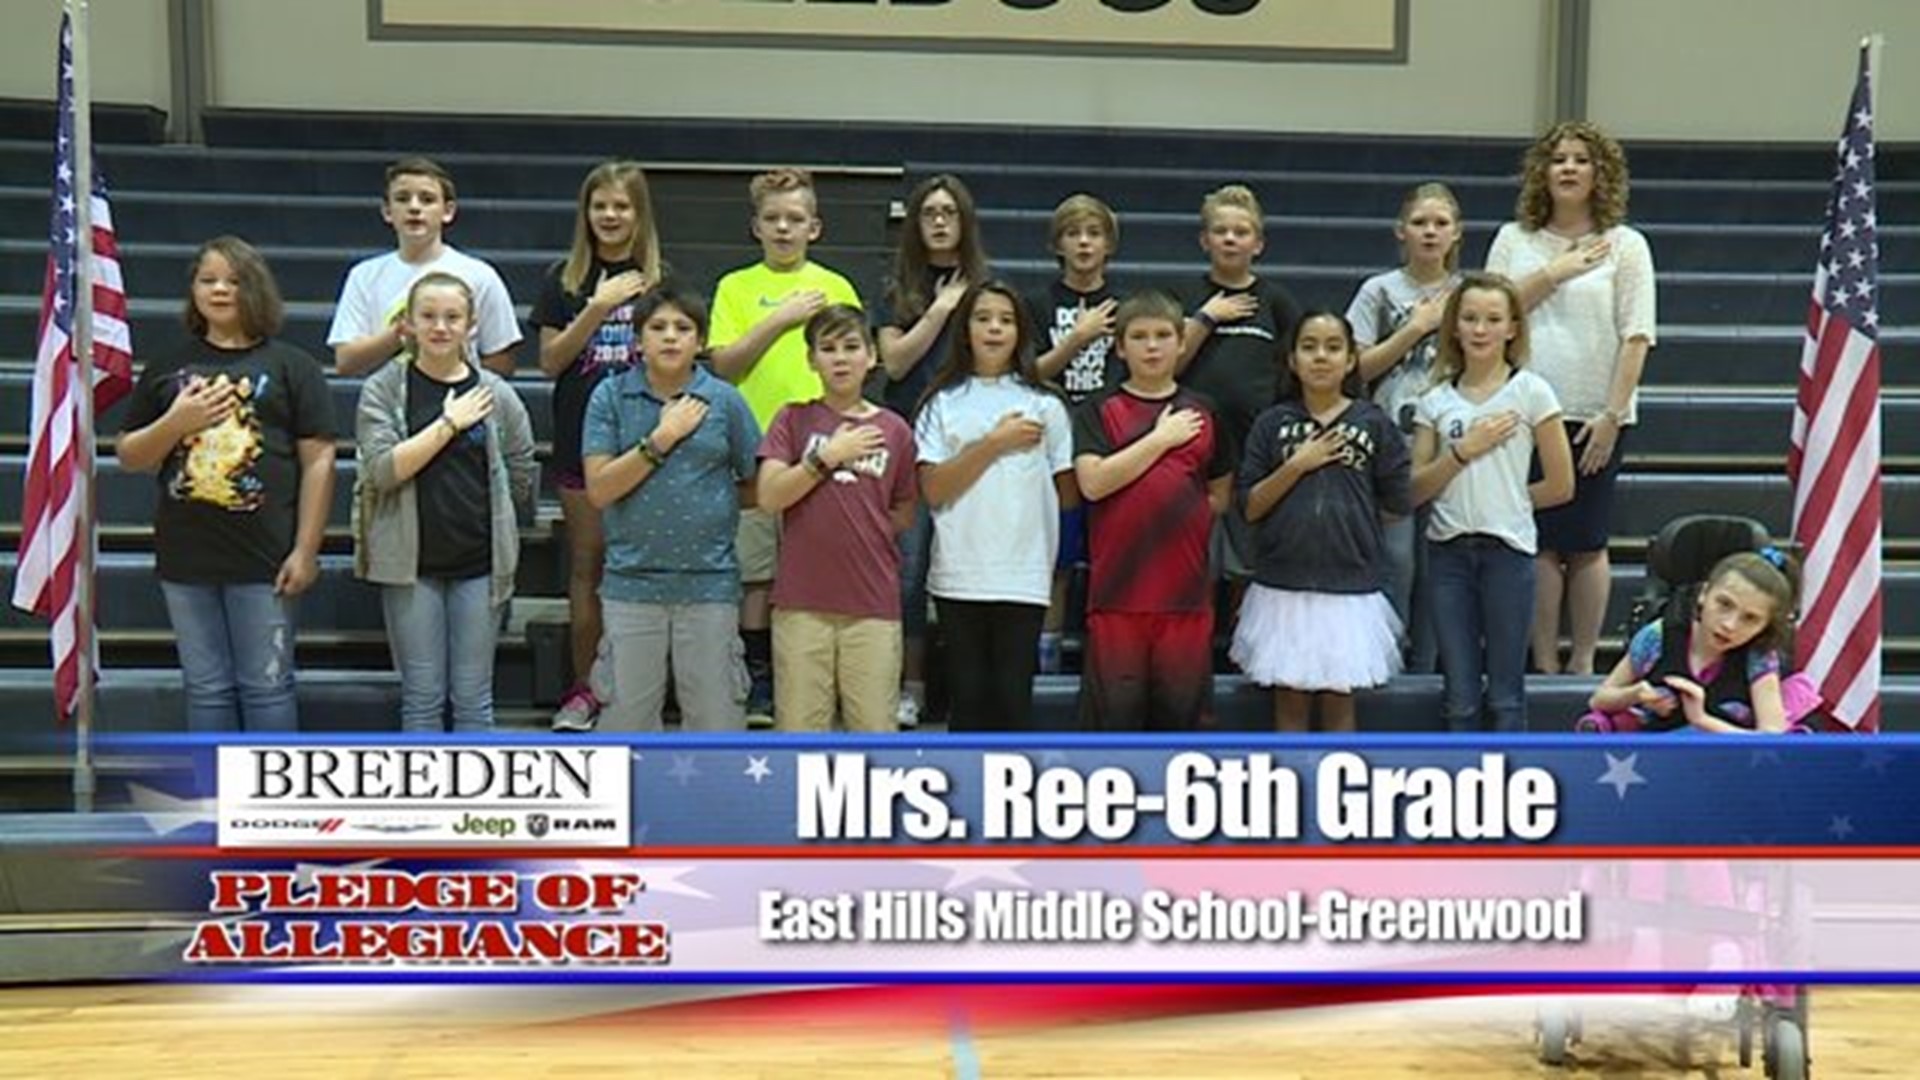 East Hills Middle School, Greenwood - Mrs. Reed - 6th Grade